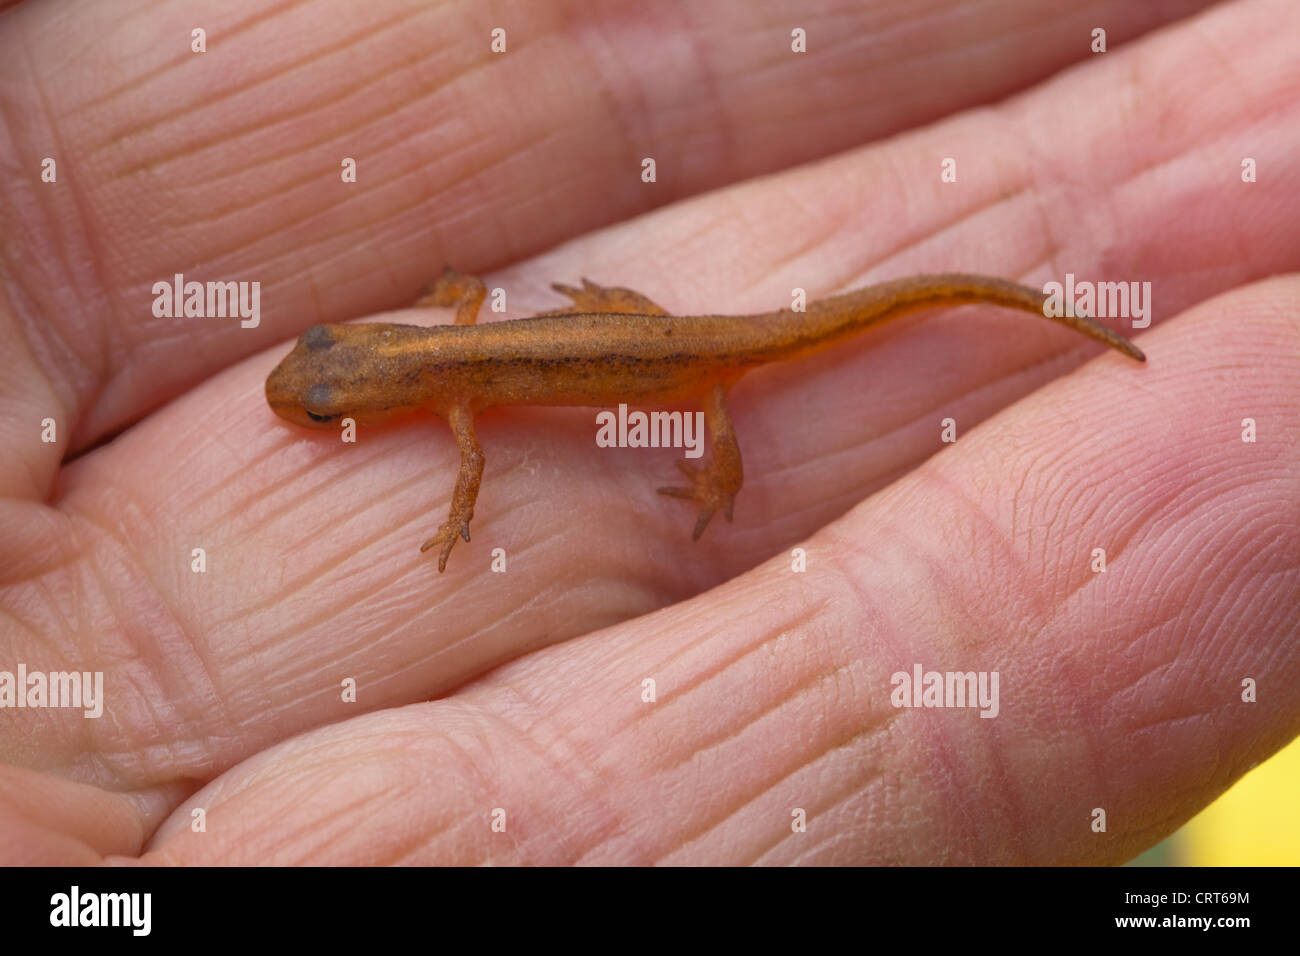 Smooth Newt (Triton vulgaris). Over wintered, metamorphosed from tadpole, young newt.Terrestrial living in damp ground. Stock Photo